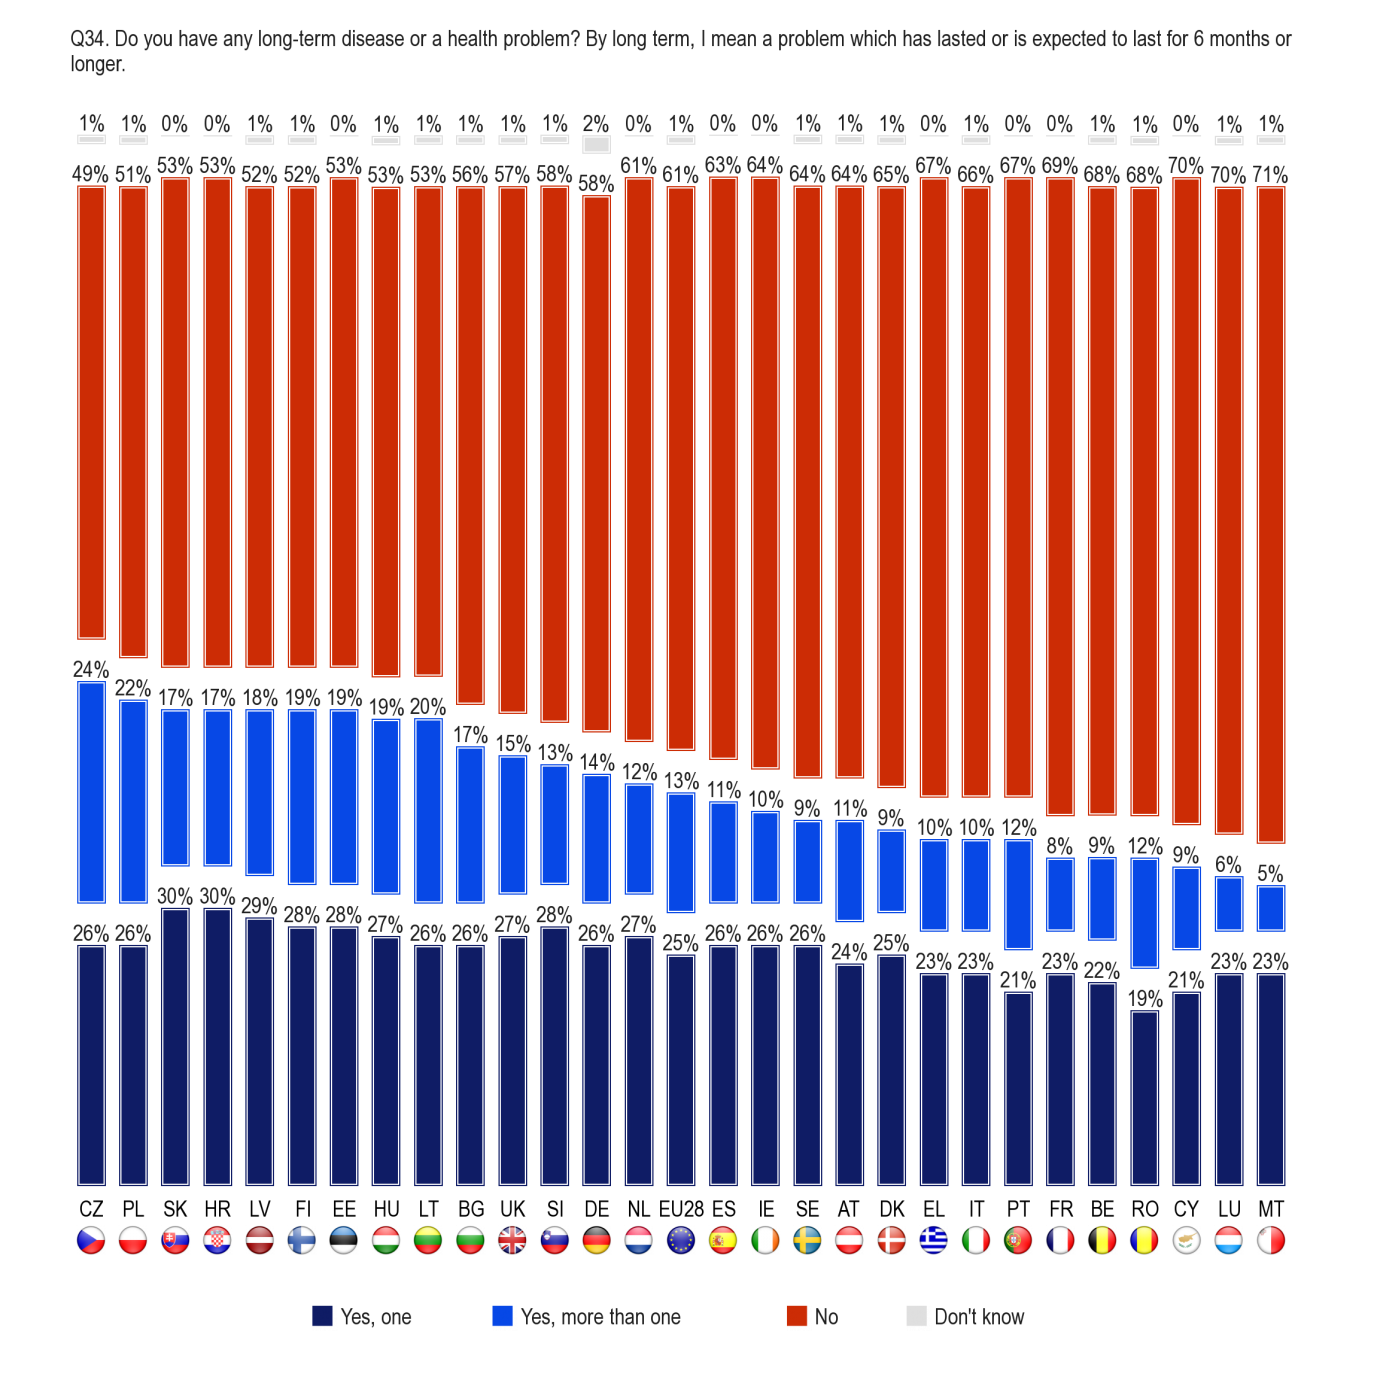 FLASH EUROBAROMETER In 13 countries, at least four out of ten respondents say that they have at least one longterm health problem.